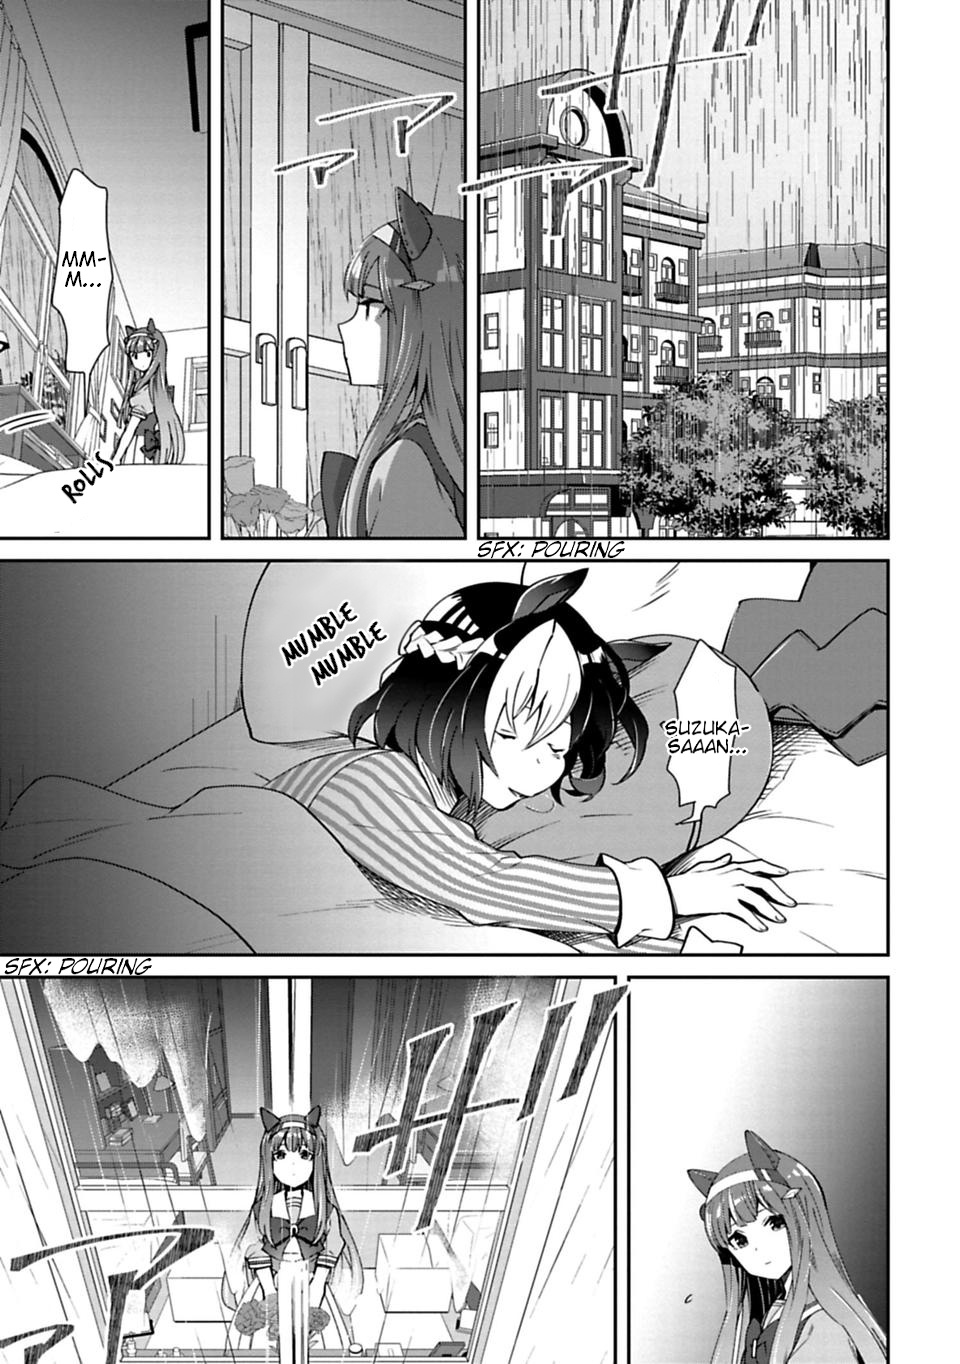 Starting Gate! Uma Musume Pretty Derby Vol.2 Chapter 13: Light #2 Part 1 - Picture 1